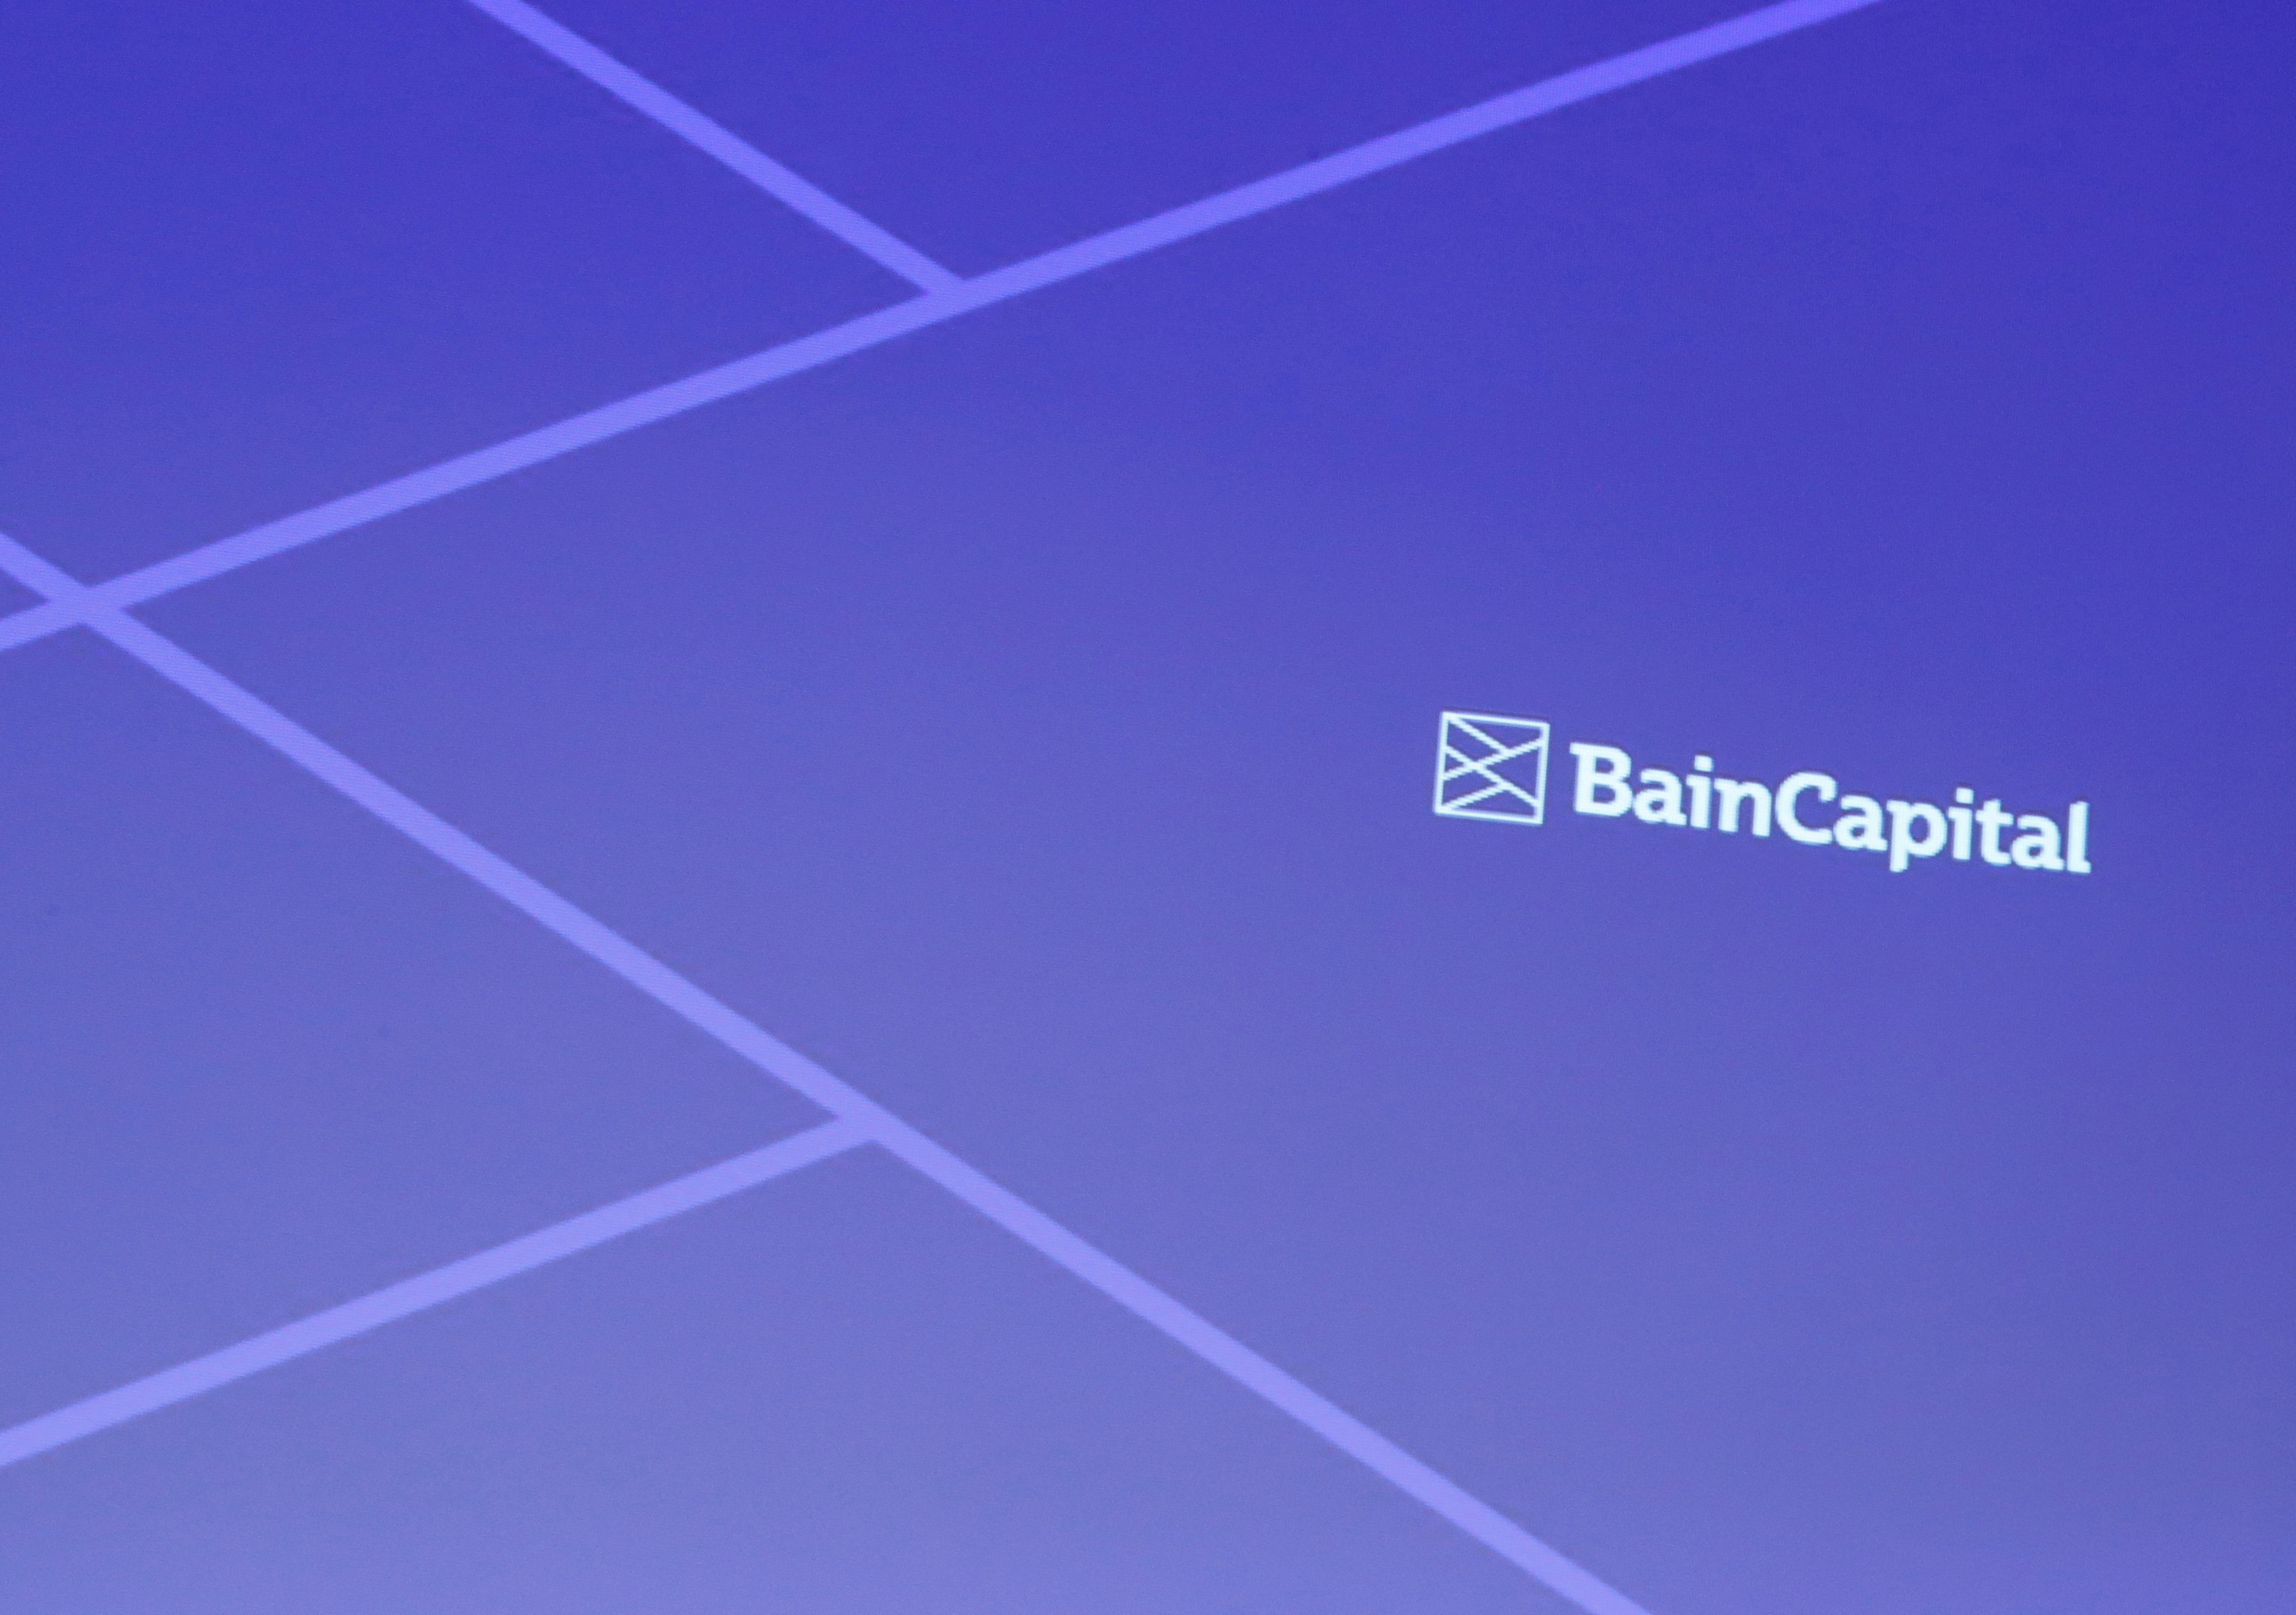 Logo of Bain Capital is screened at a news conference in Tokyo, Japan